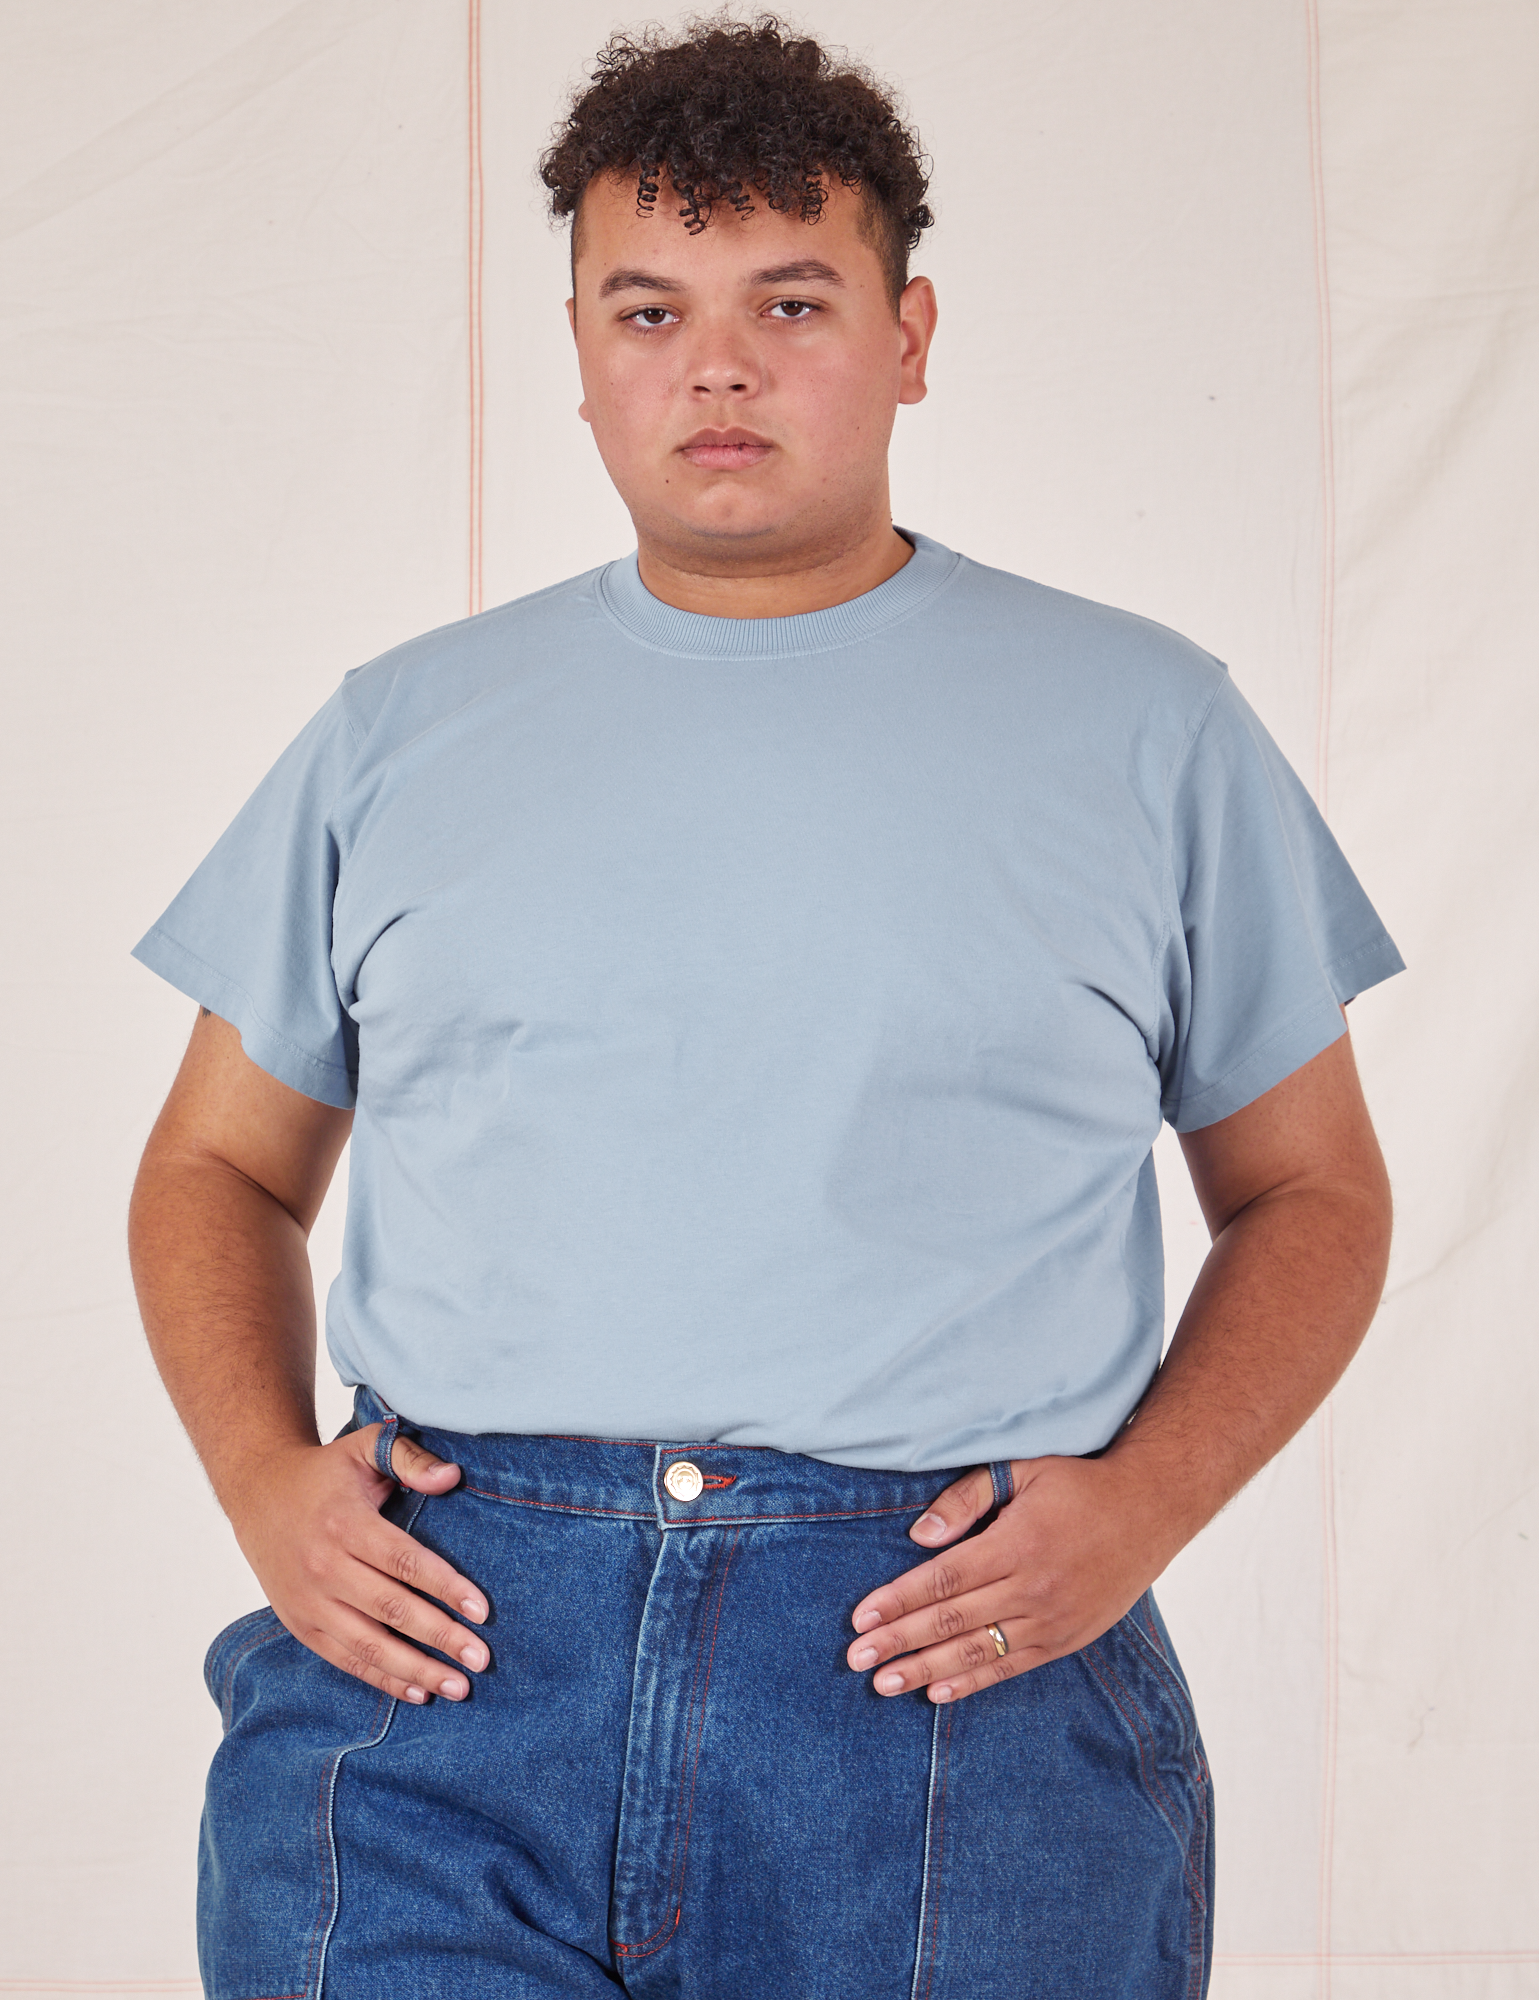 Miguel is 6'0" and wearing 2XL The Organic Vintage Tee in Periwinkle